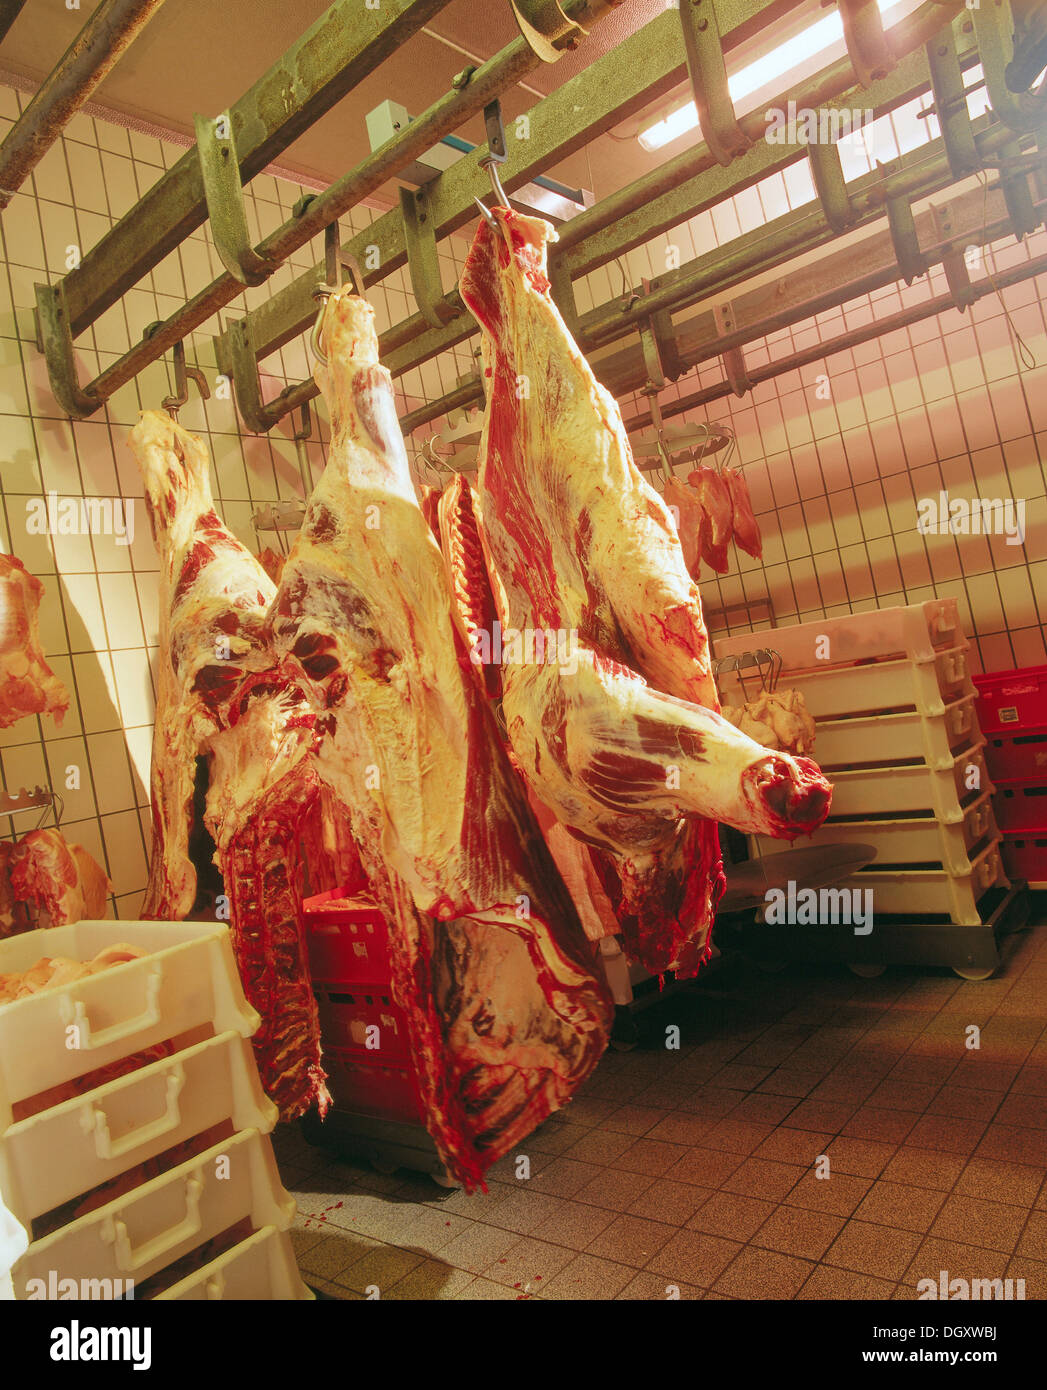 Suspended pig carcasses at a slaughterhouse Stock Photo